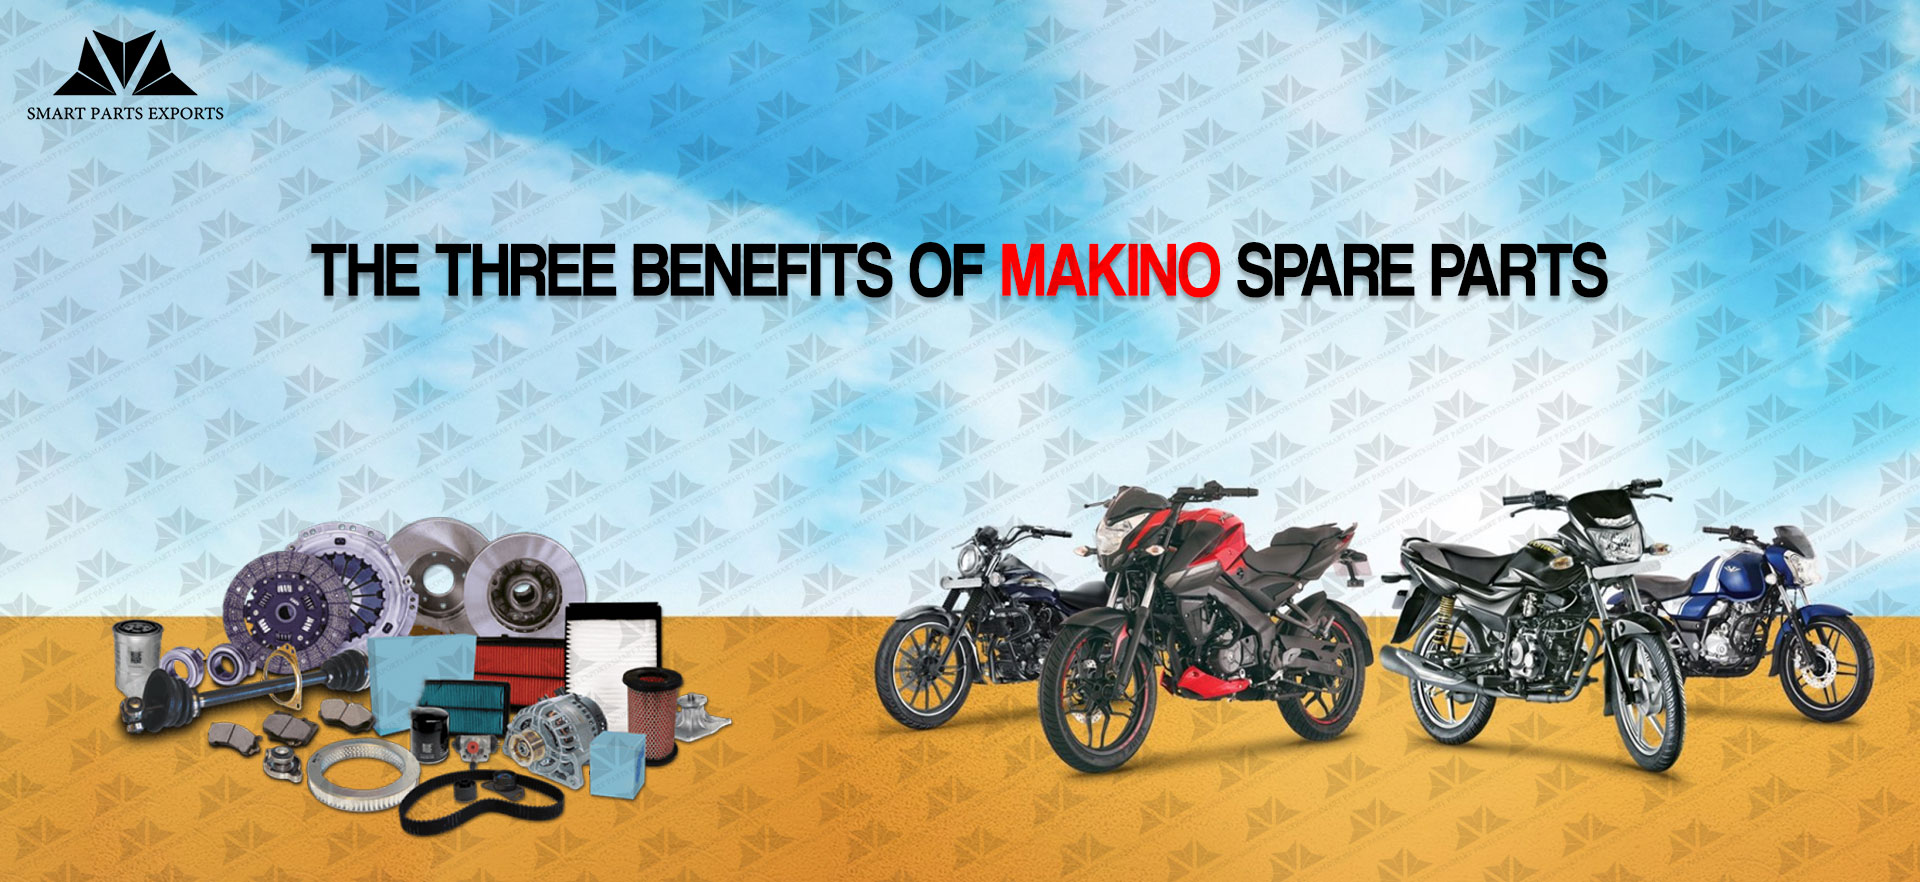 The Three Benefits of Makino Spare Parts